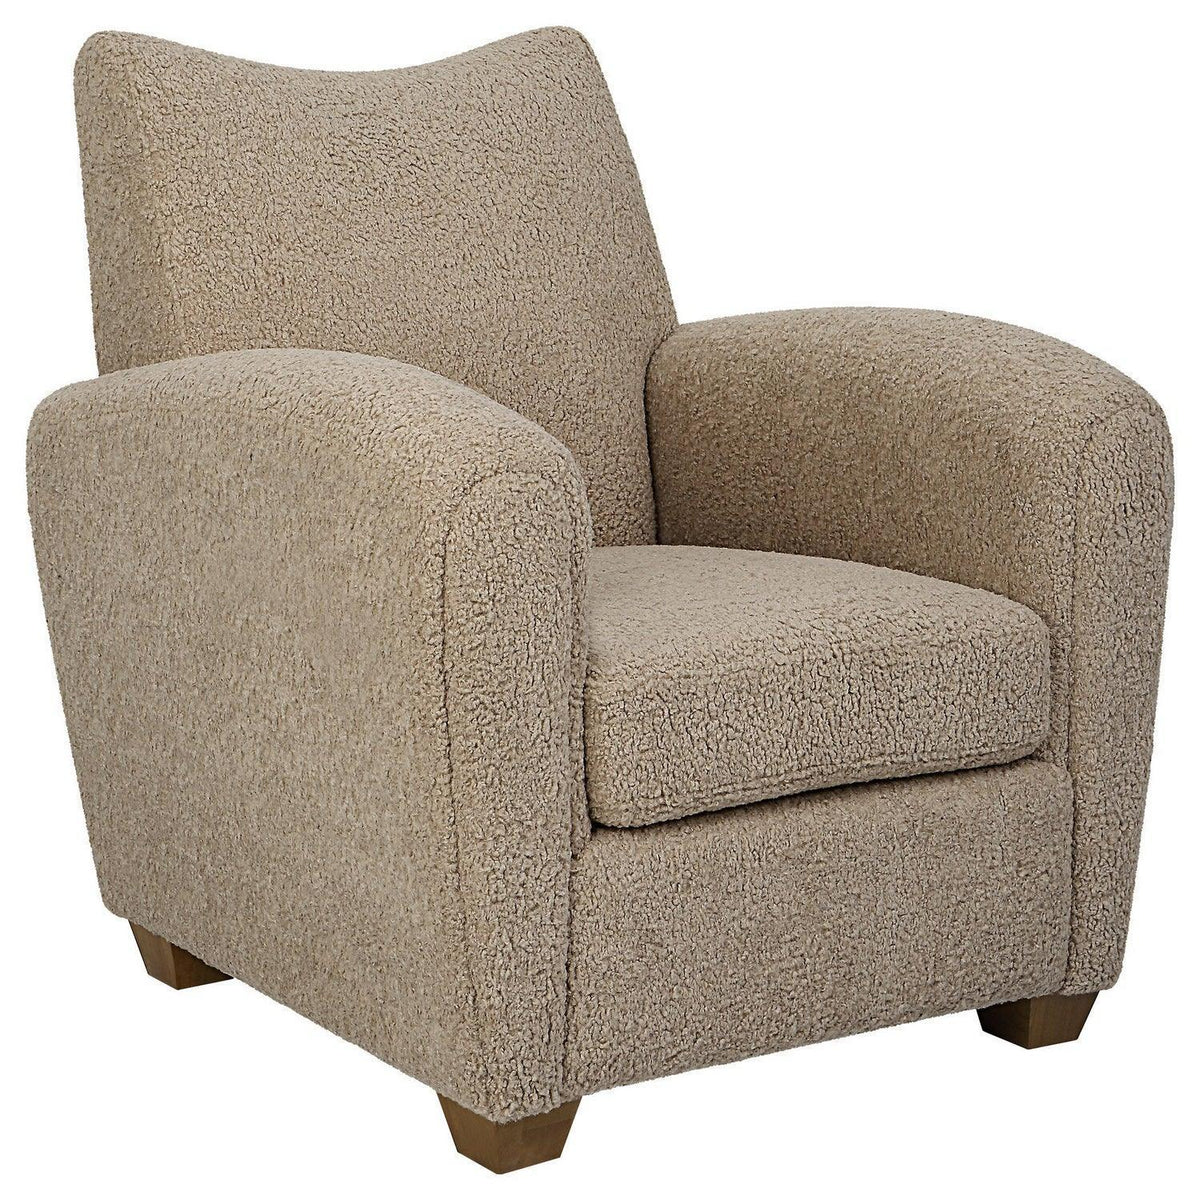 The Uttermost - Teddy Accent Chair - 23694 | Montreal Lighting & Hardware